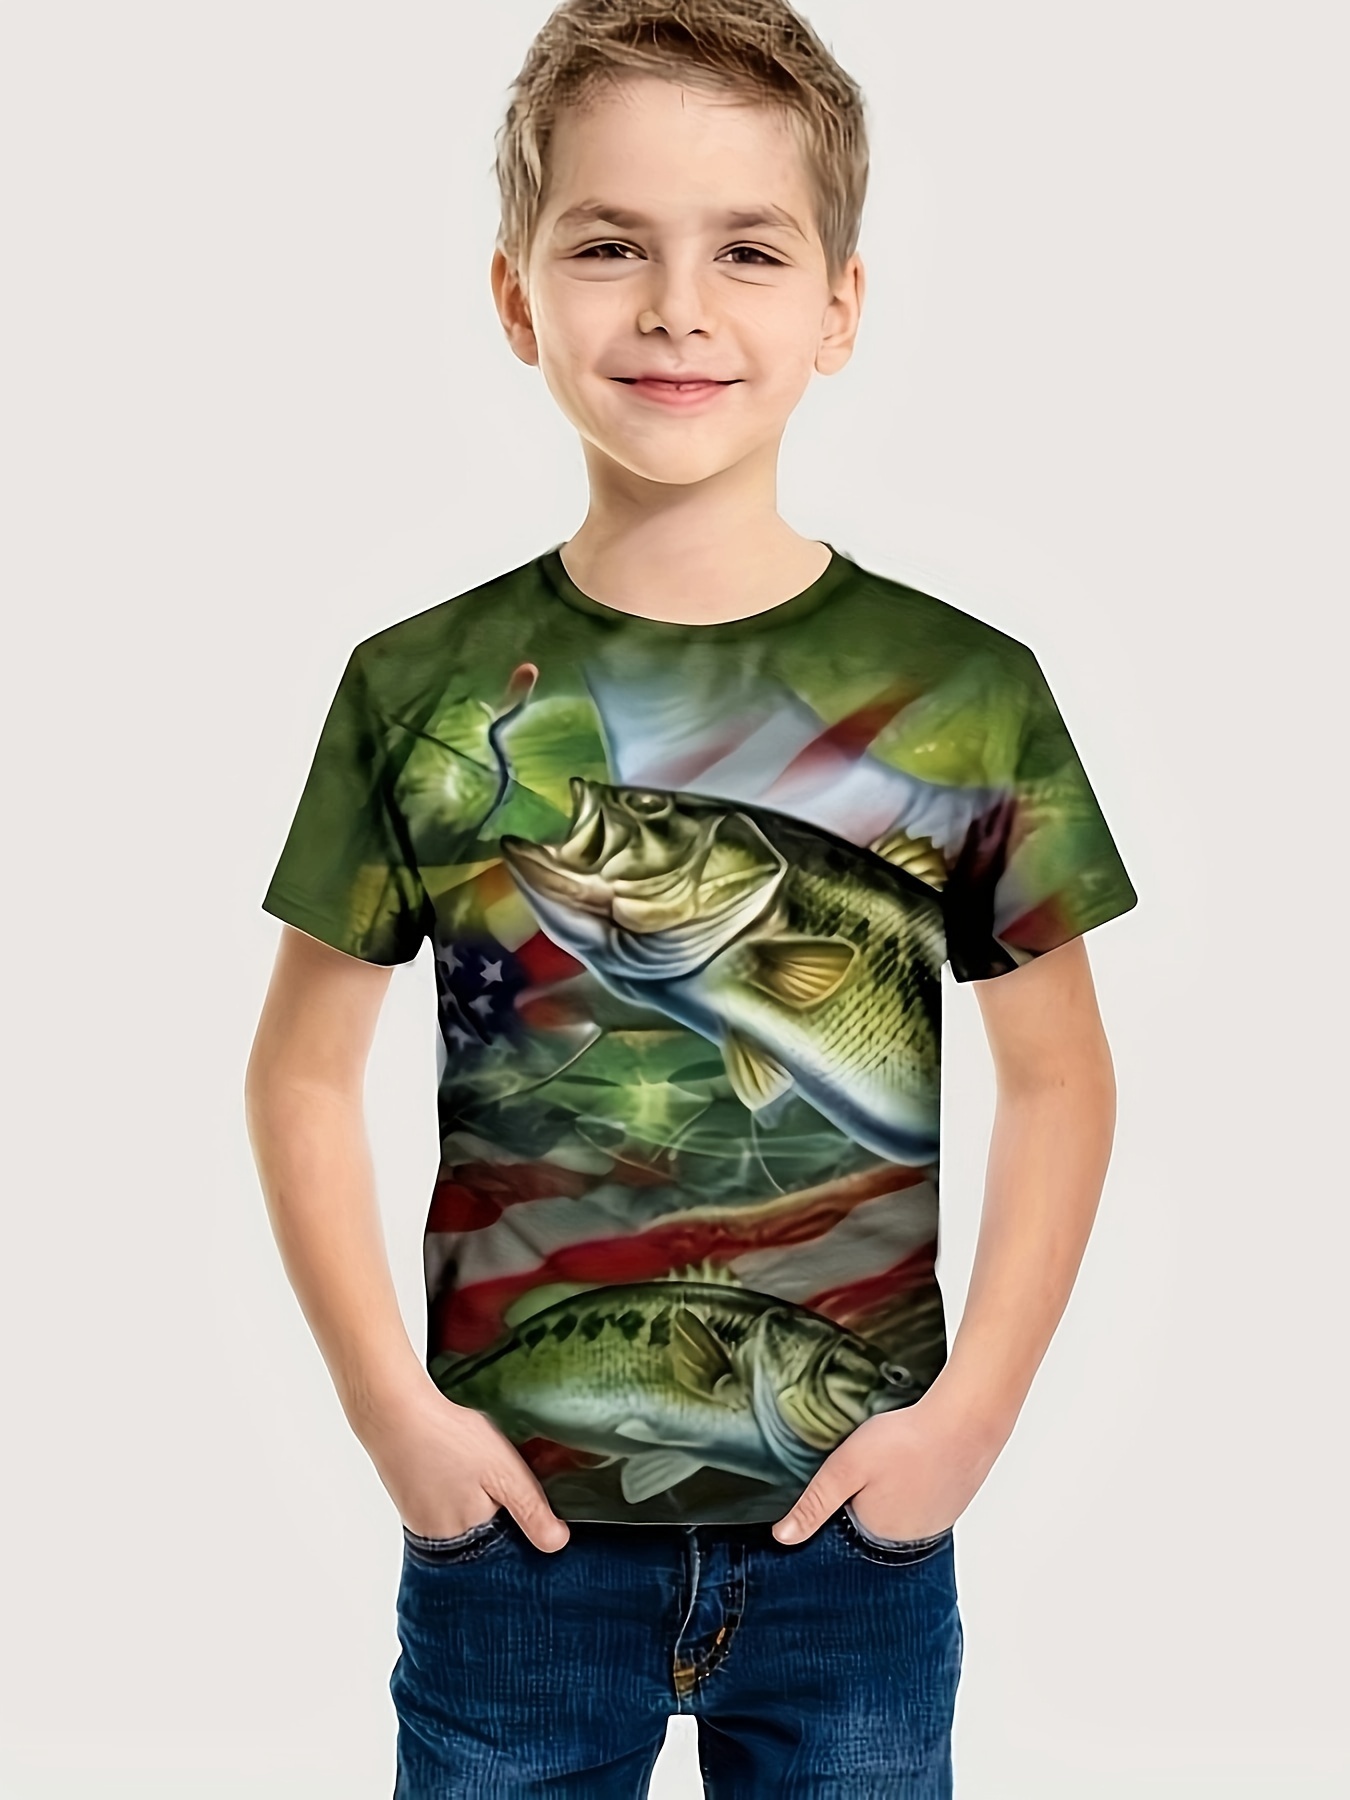 3D Bass Fishing Shirts for Men, Camouflage Fish Reaper Print